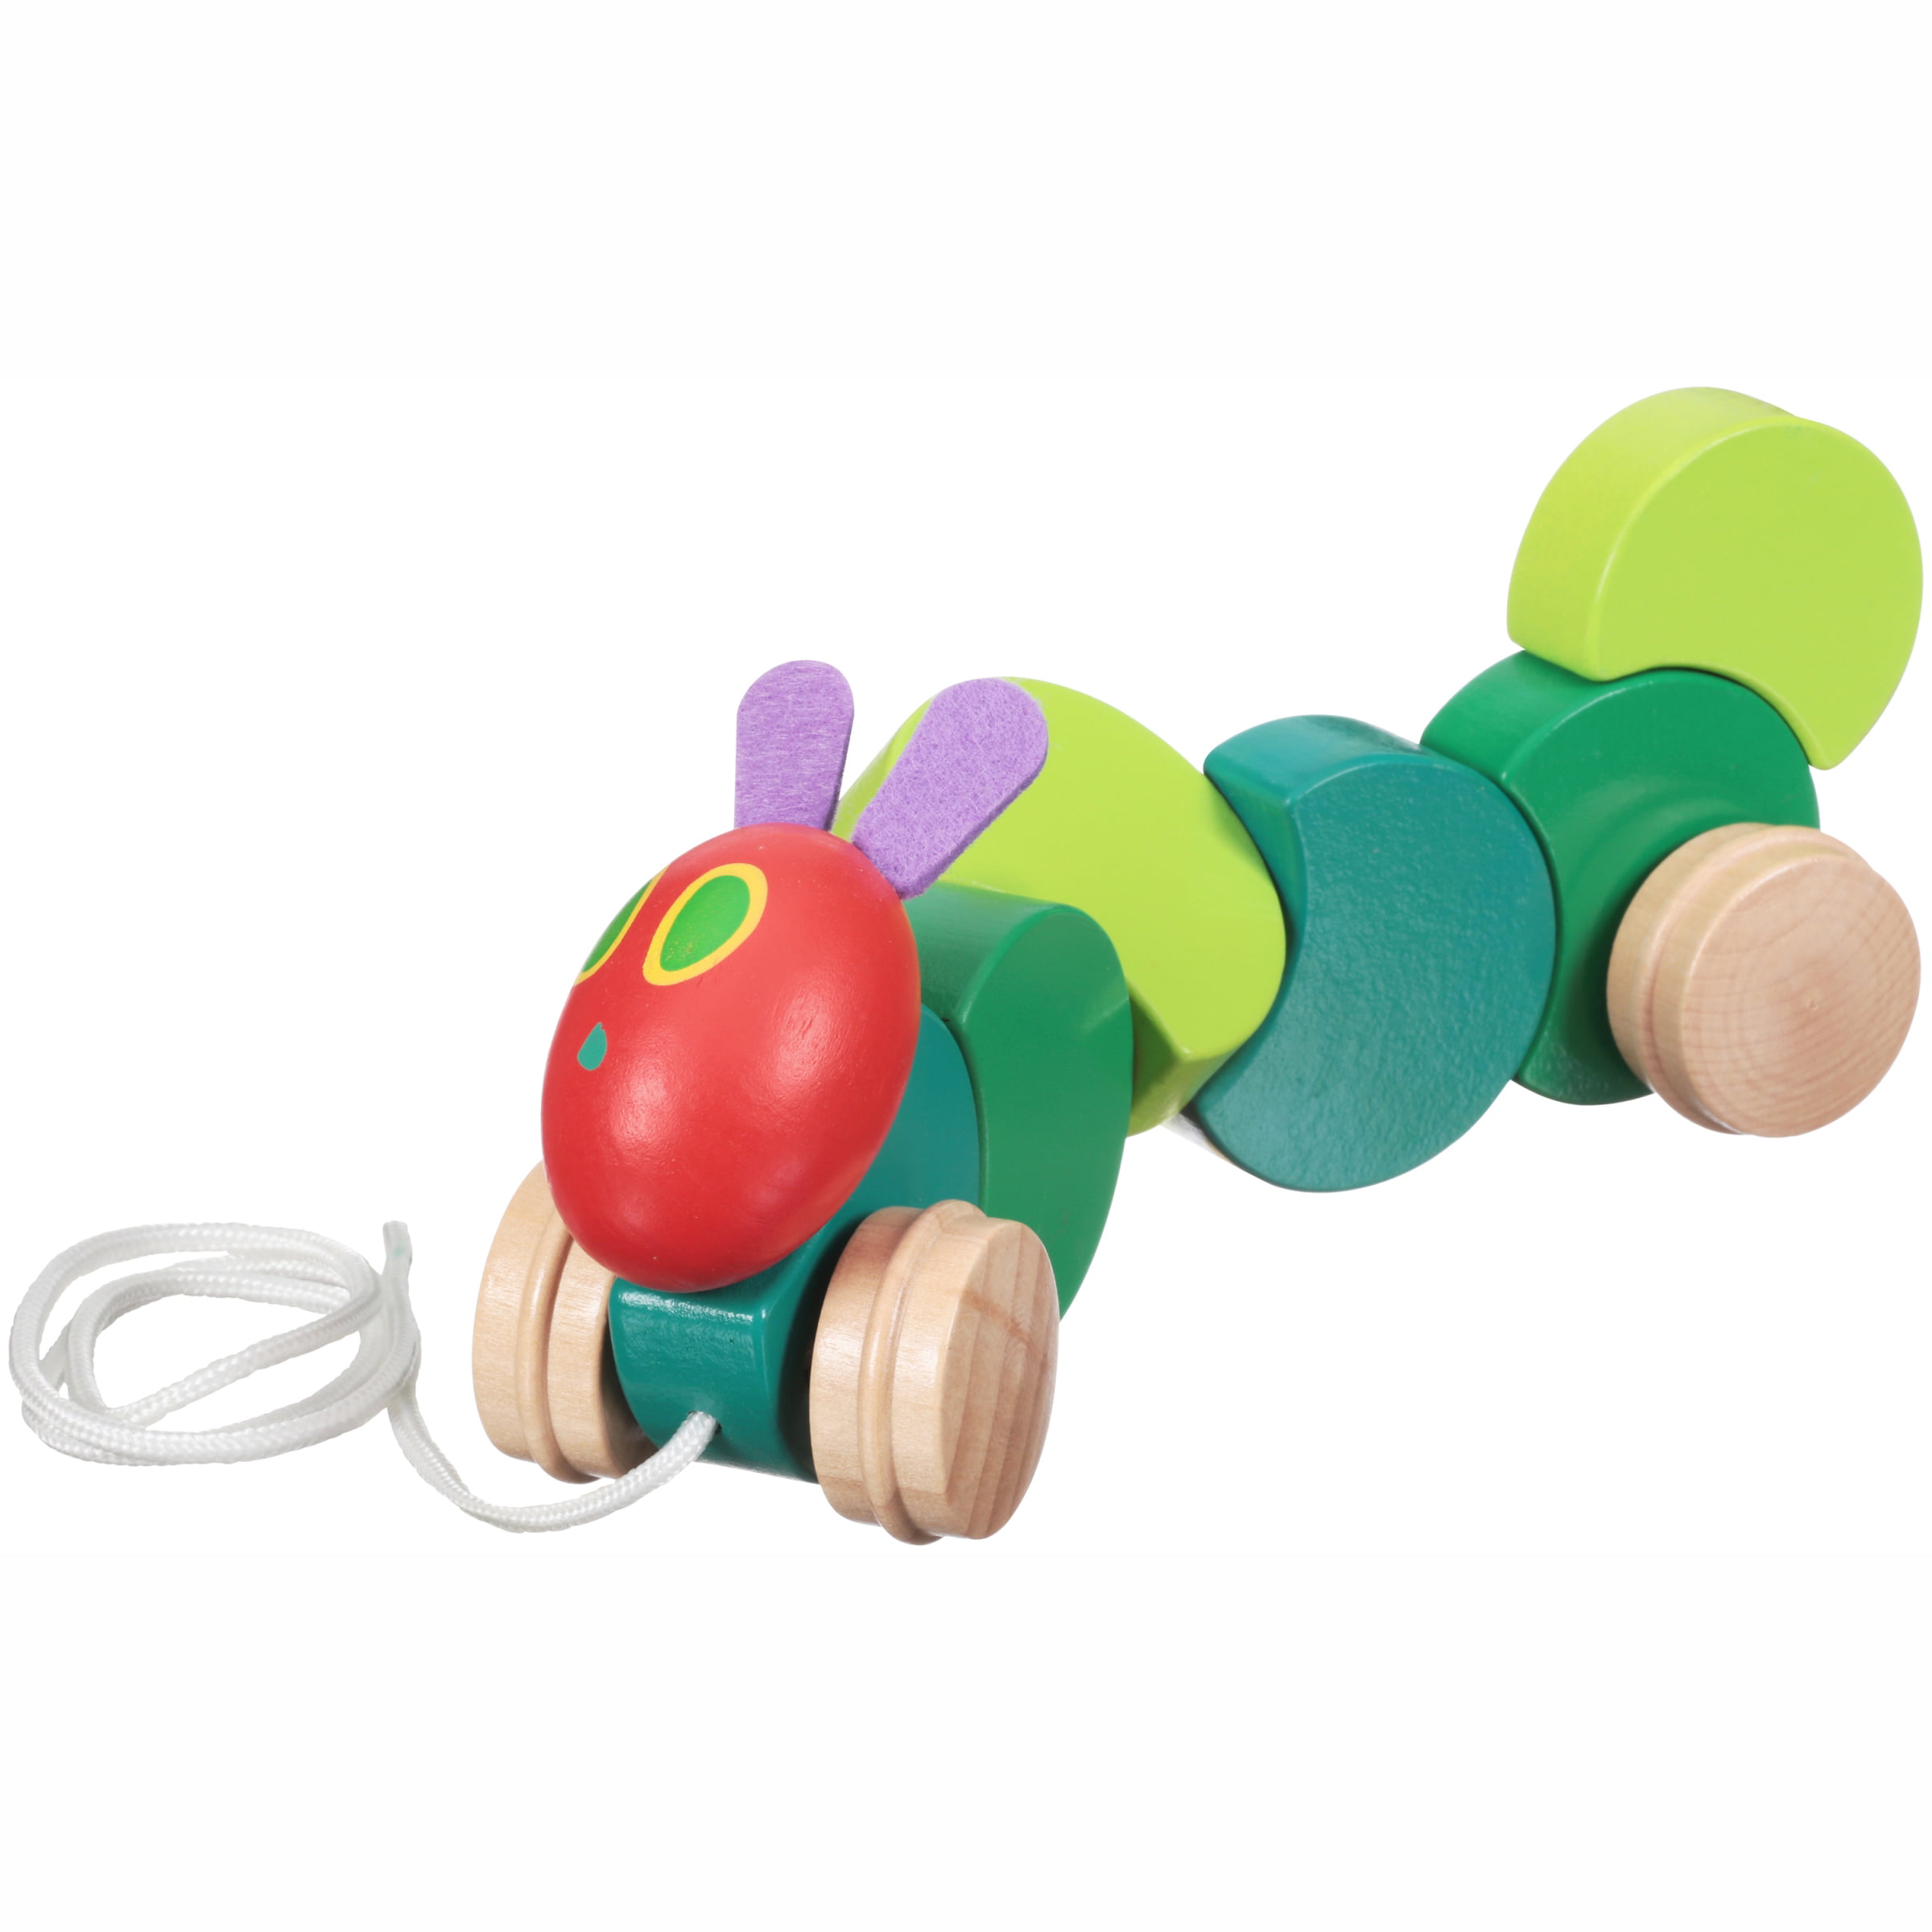 4x Wind-up Toys Caterpillar Worm Mechanical Toy Collectible for Kids Toddler 